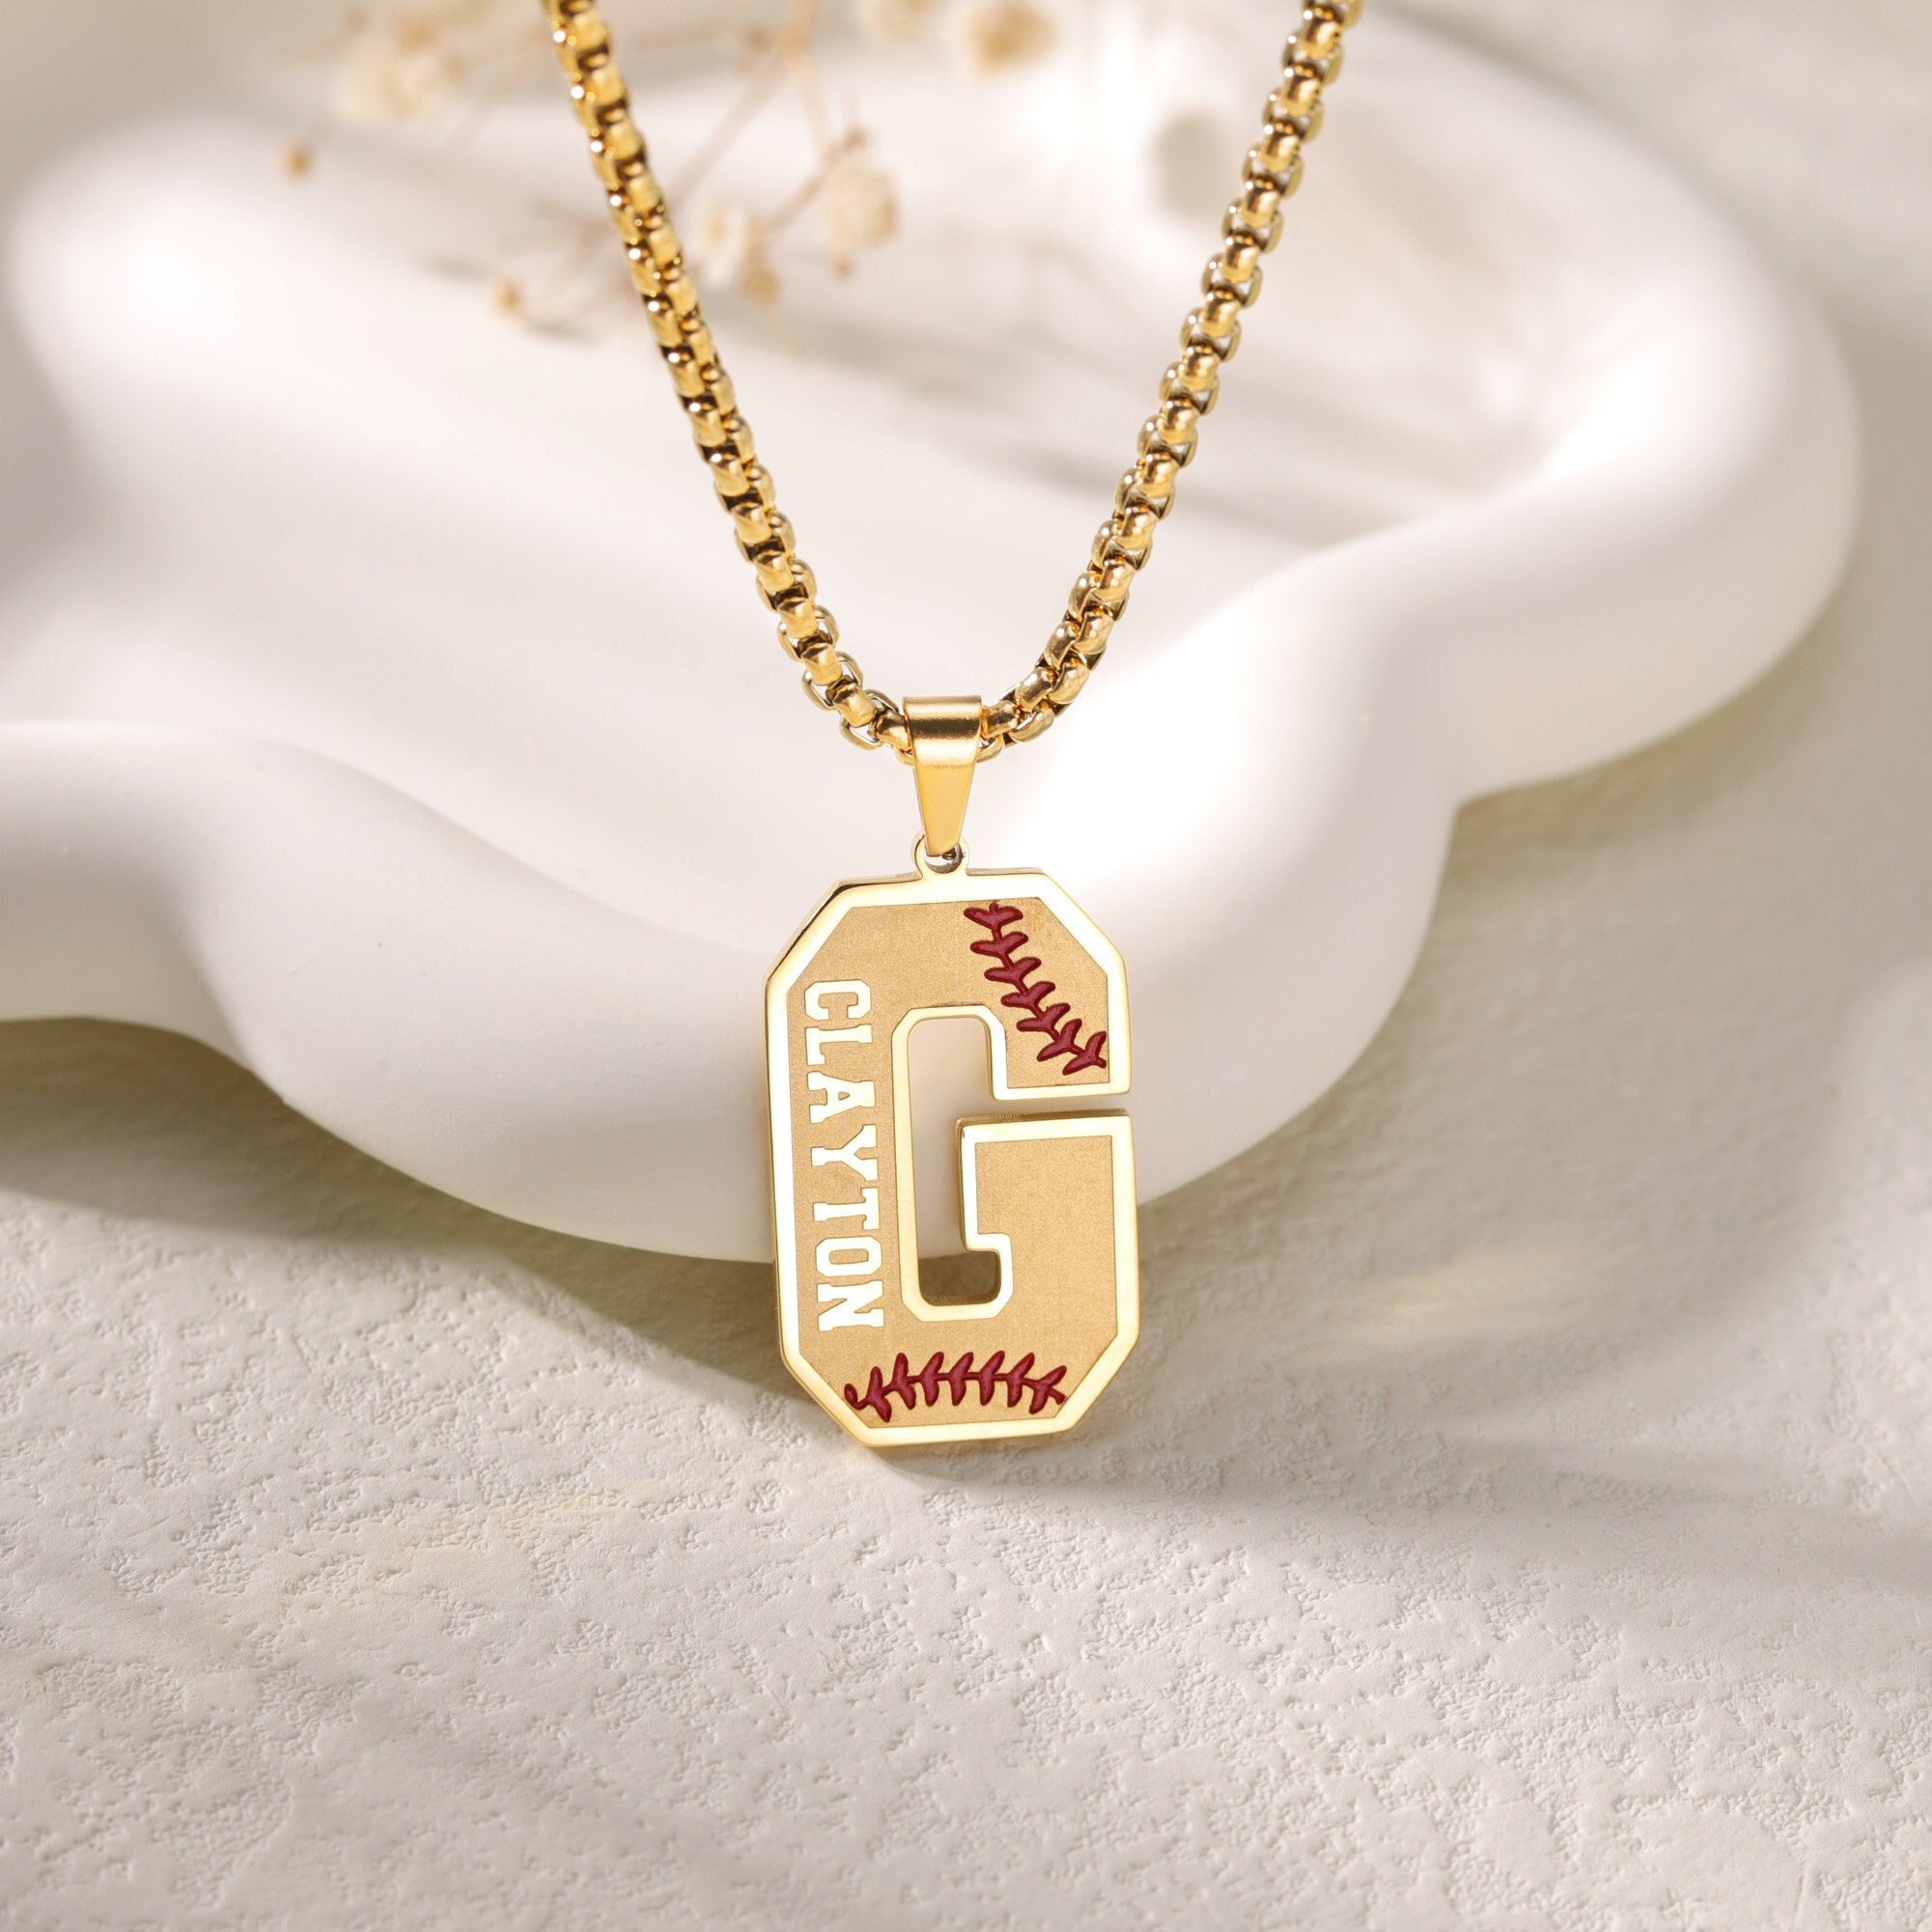 Baseball Mom Silver Pendant Necklace – Stamps of Love, LLC